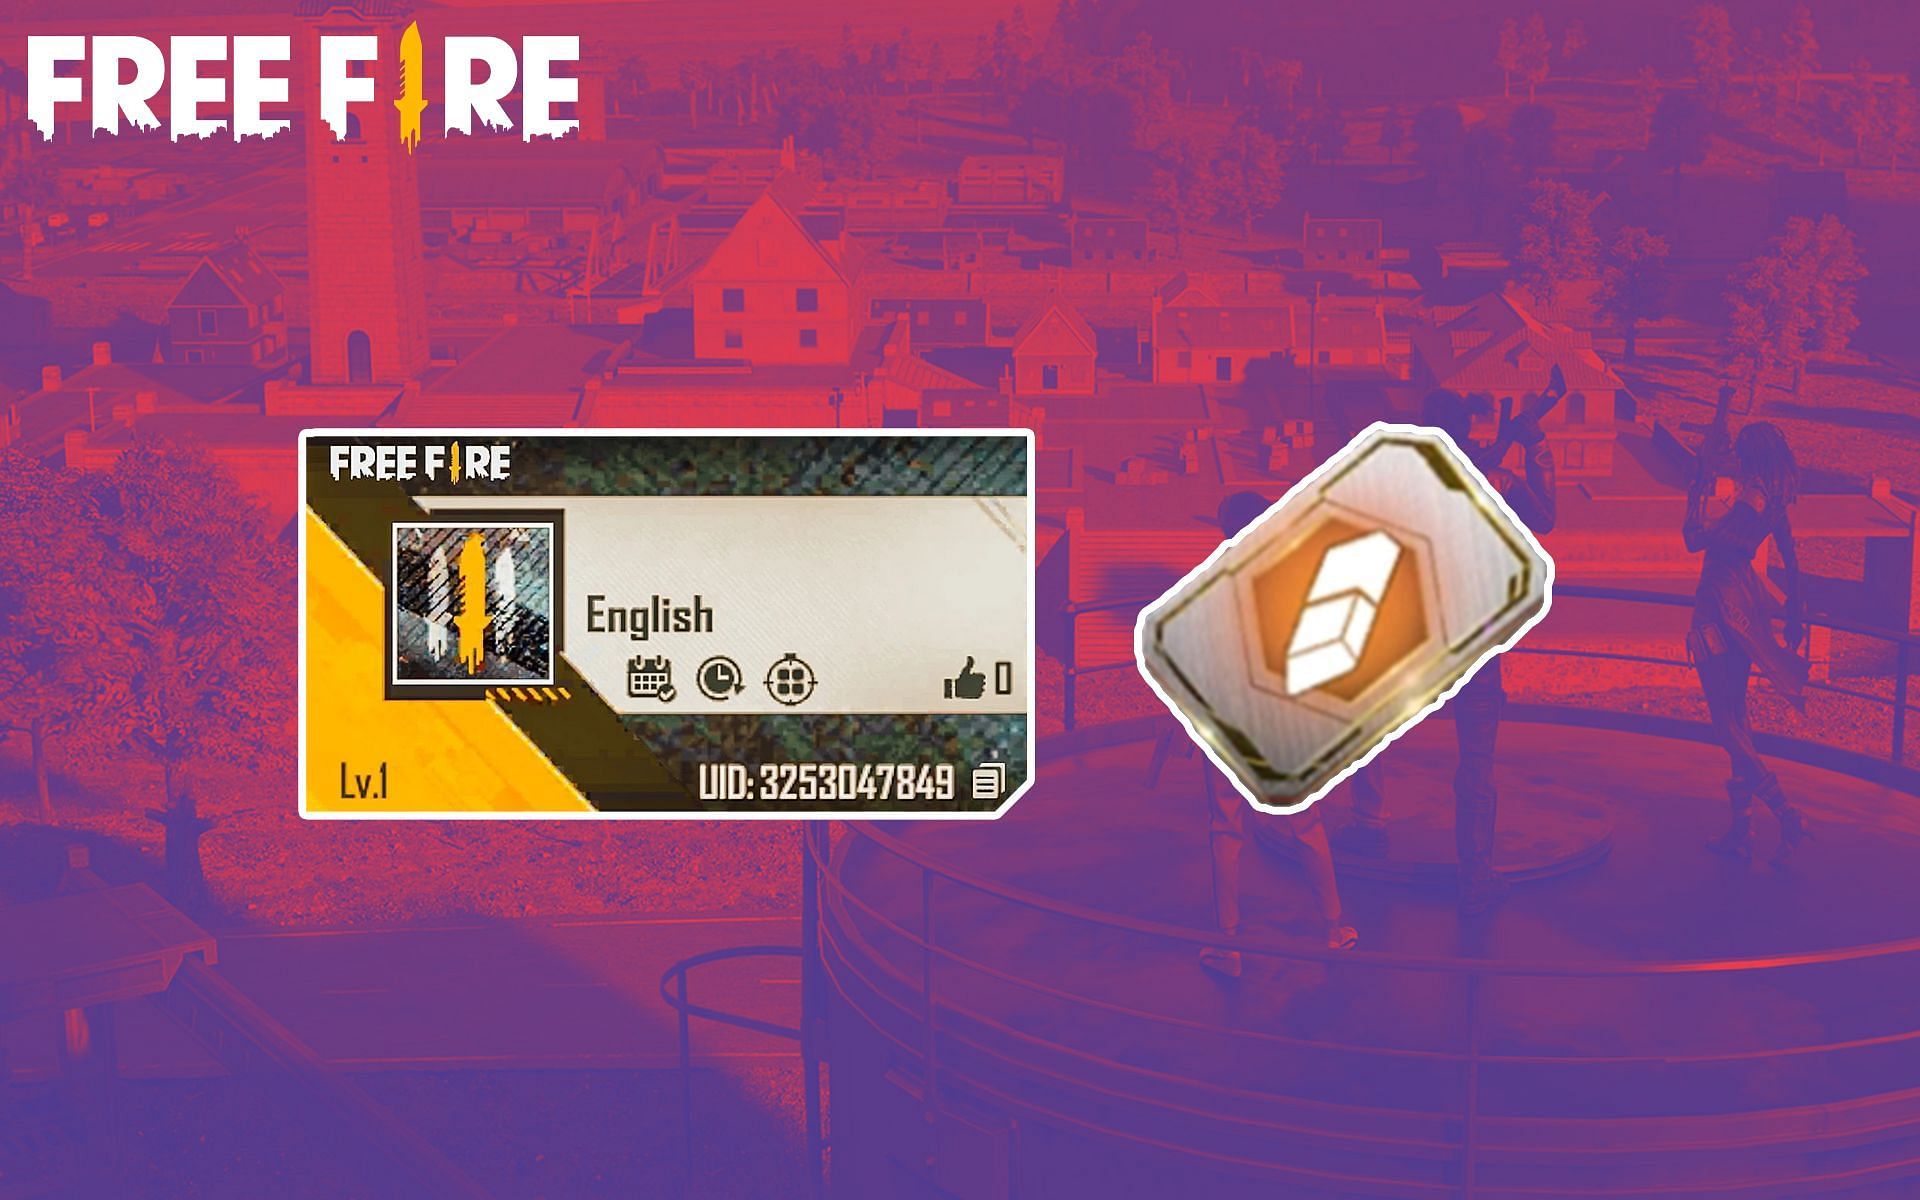 The name change card is available for exchange in the store (Image via Sportskeeda)